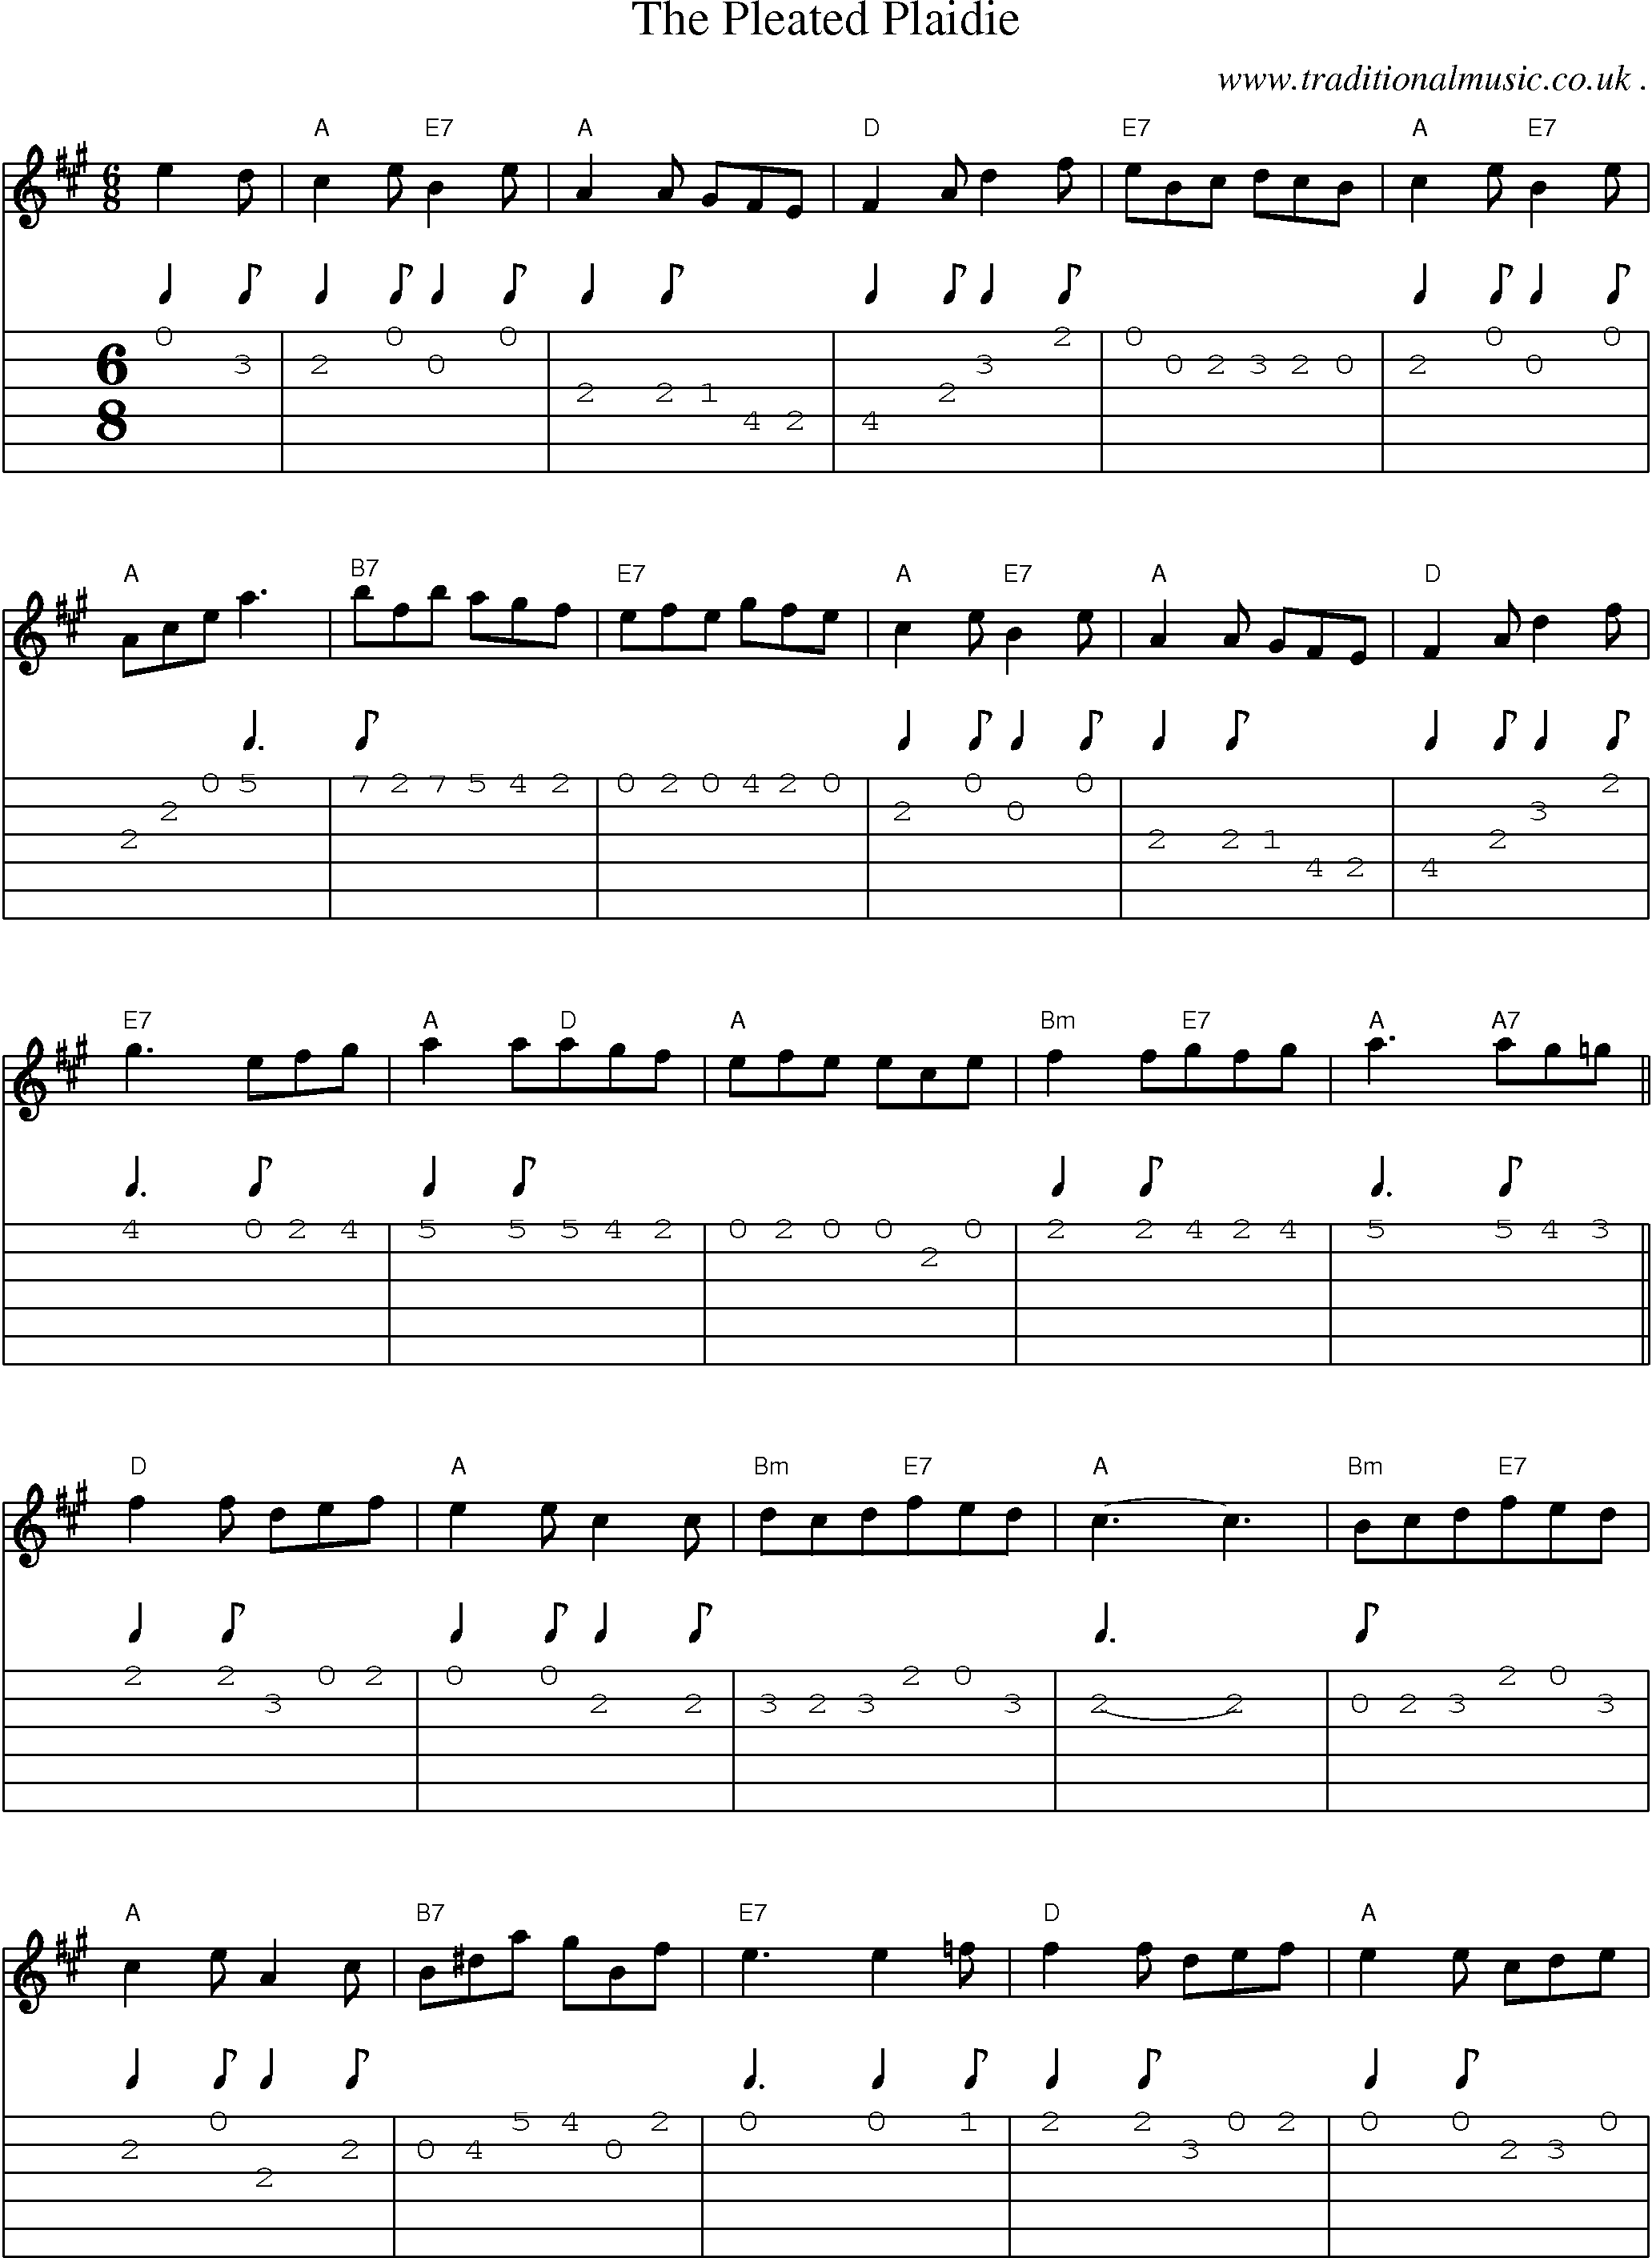 Sheet-Music and Guitar Tabs for The Pleated Plaidie